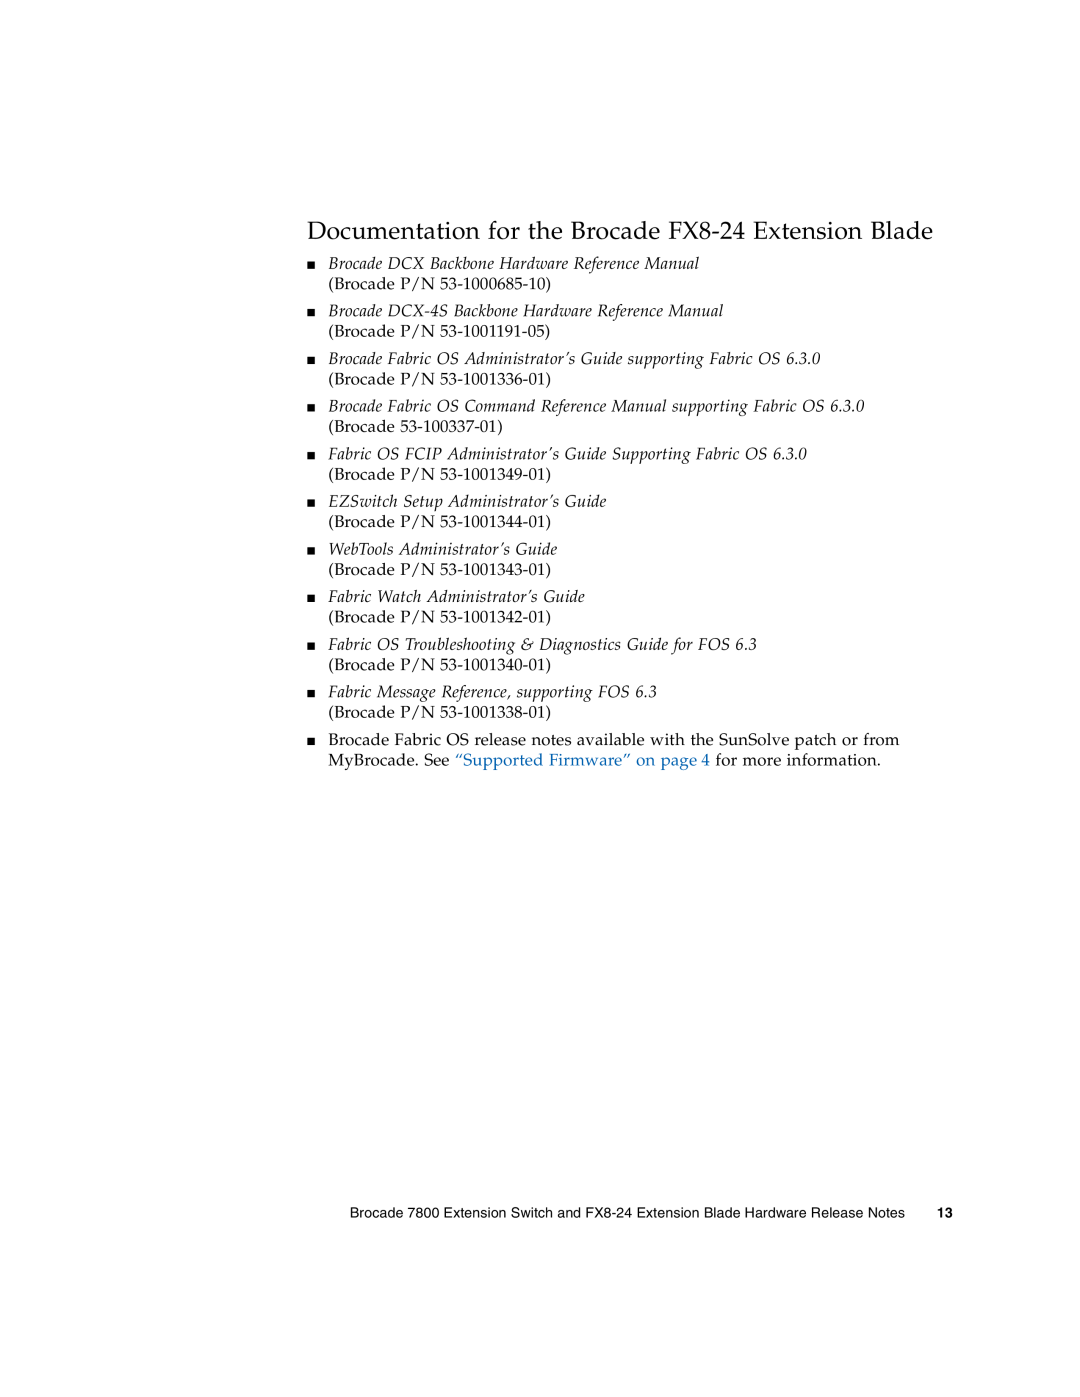 Sun Microsystems 7800 manual Documentation for the Brocade FX8-24 Extension Blade 